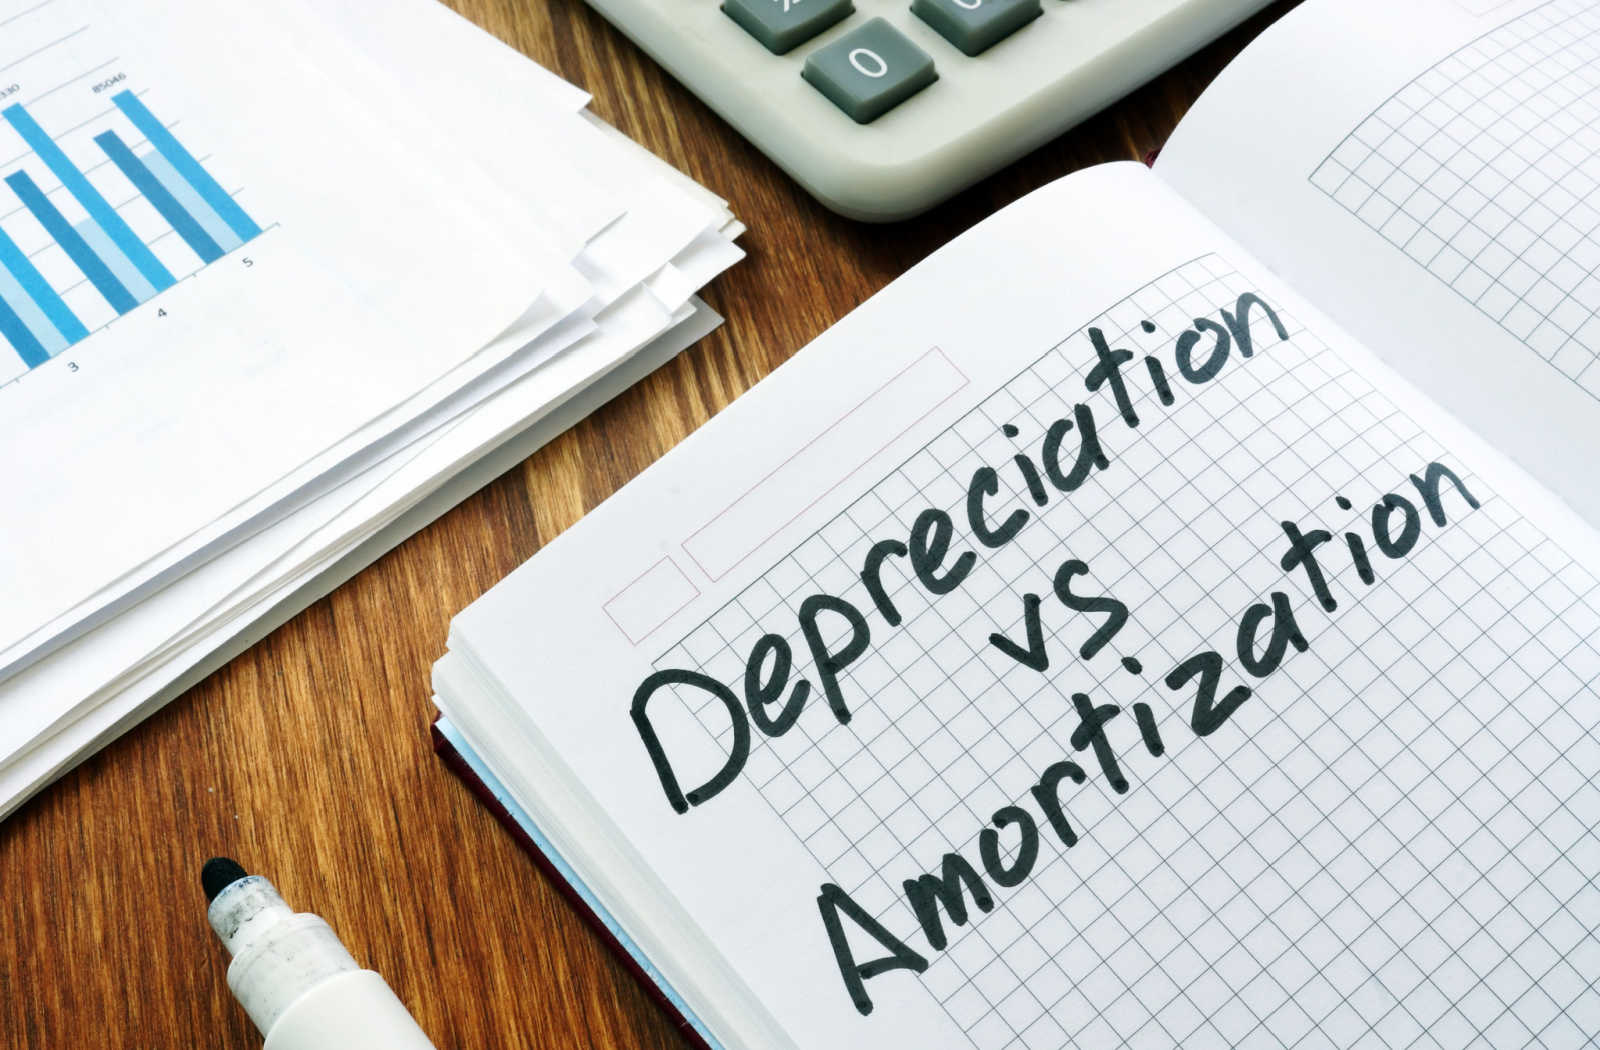 An open notebook with the words "depreciation vs. amortization" written on the page.